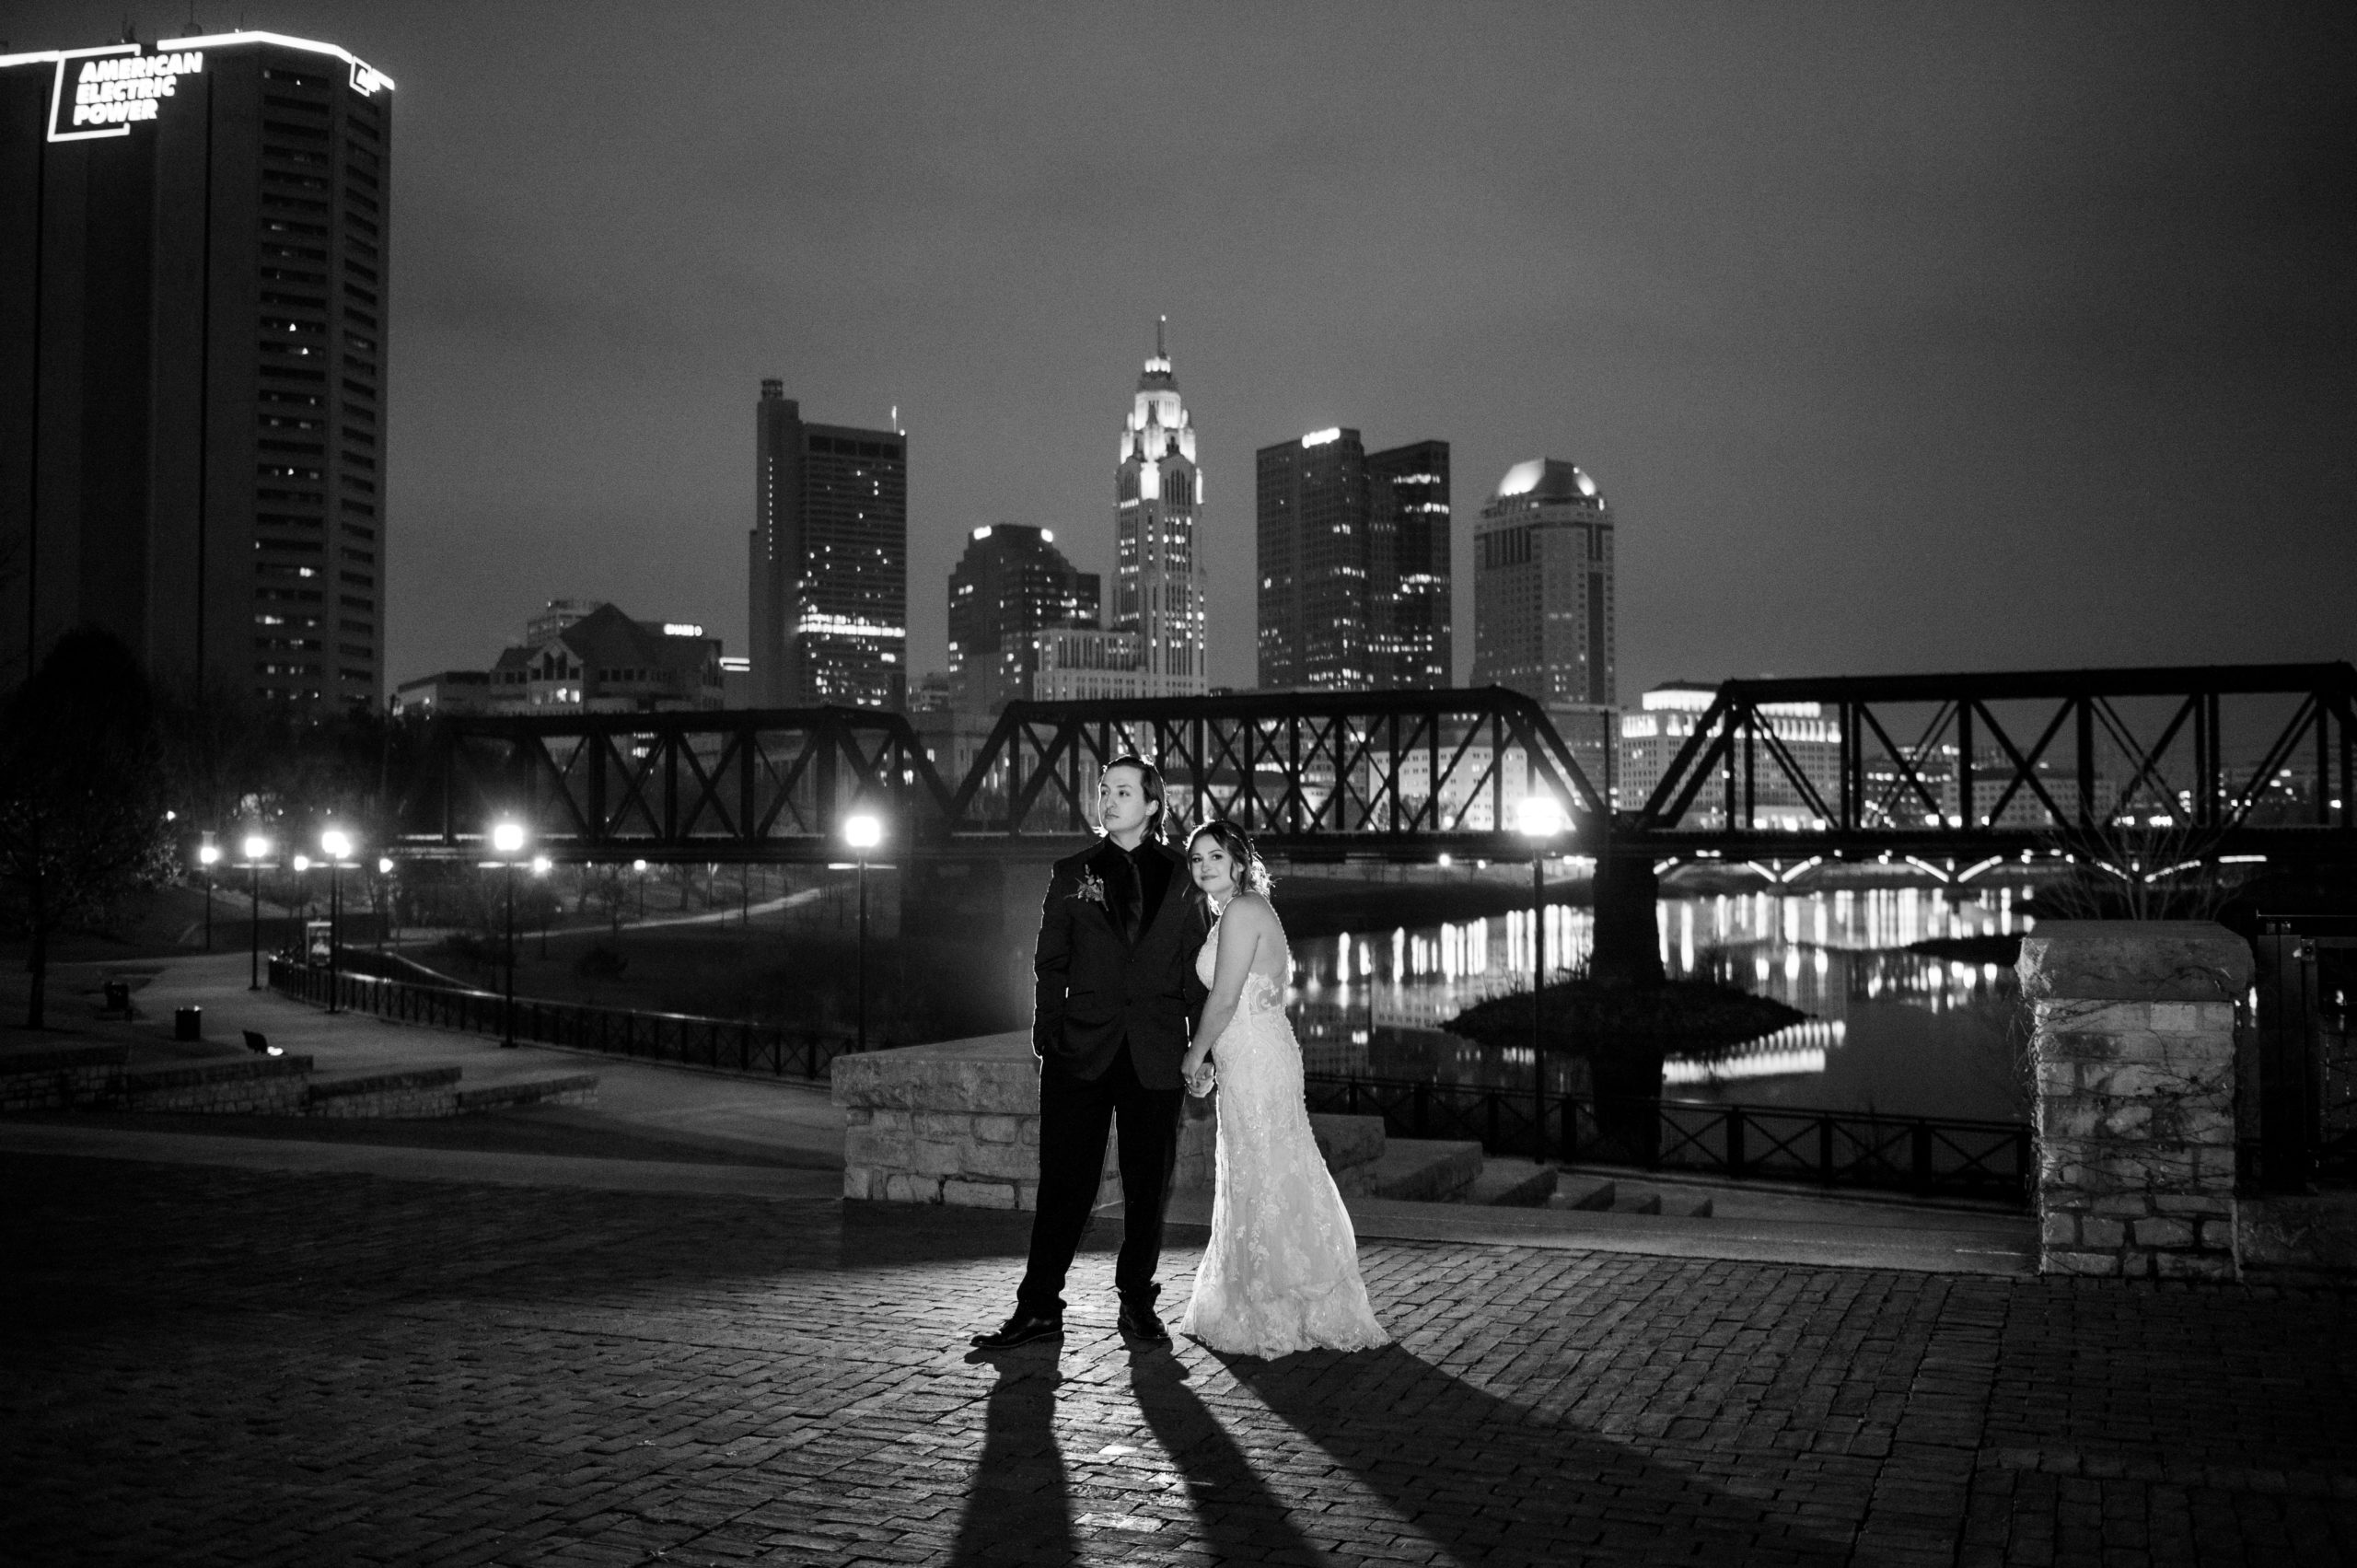 Bride and groom hold hands on the bank of the Olentangy River in Columbus Ohio at night.